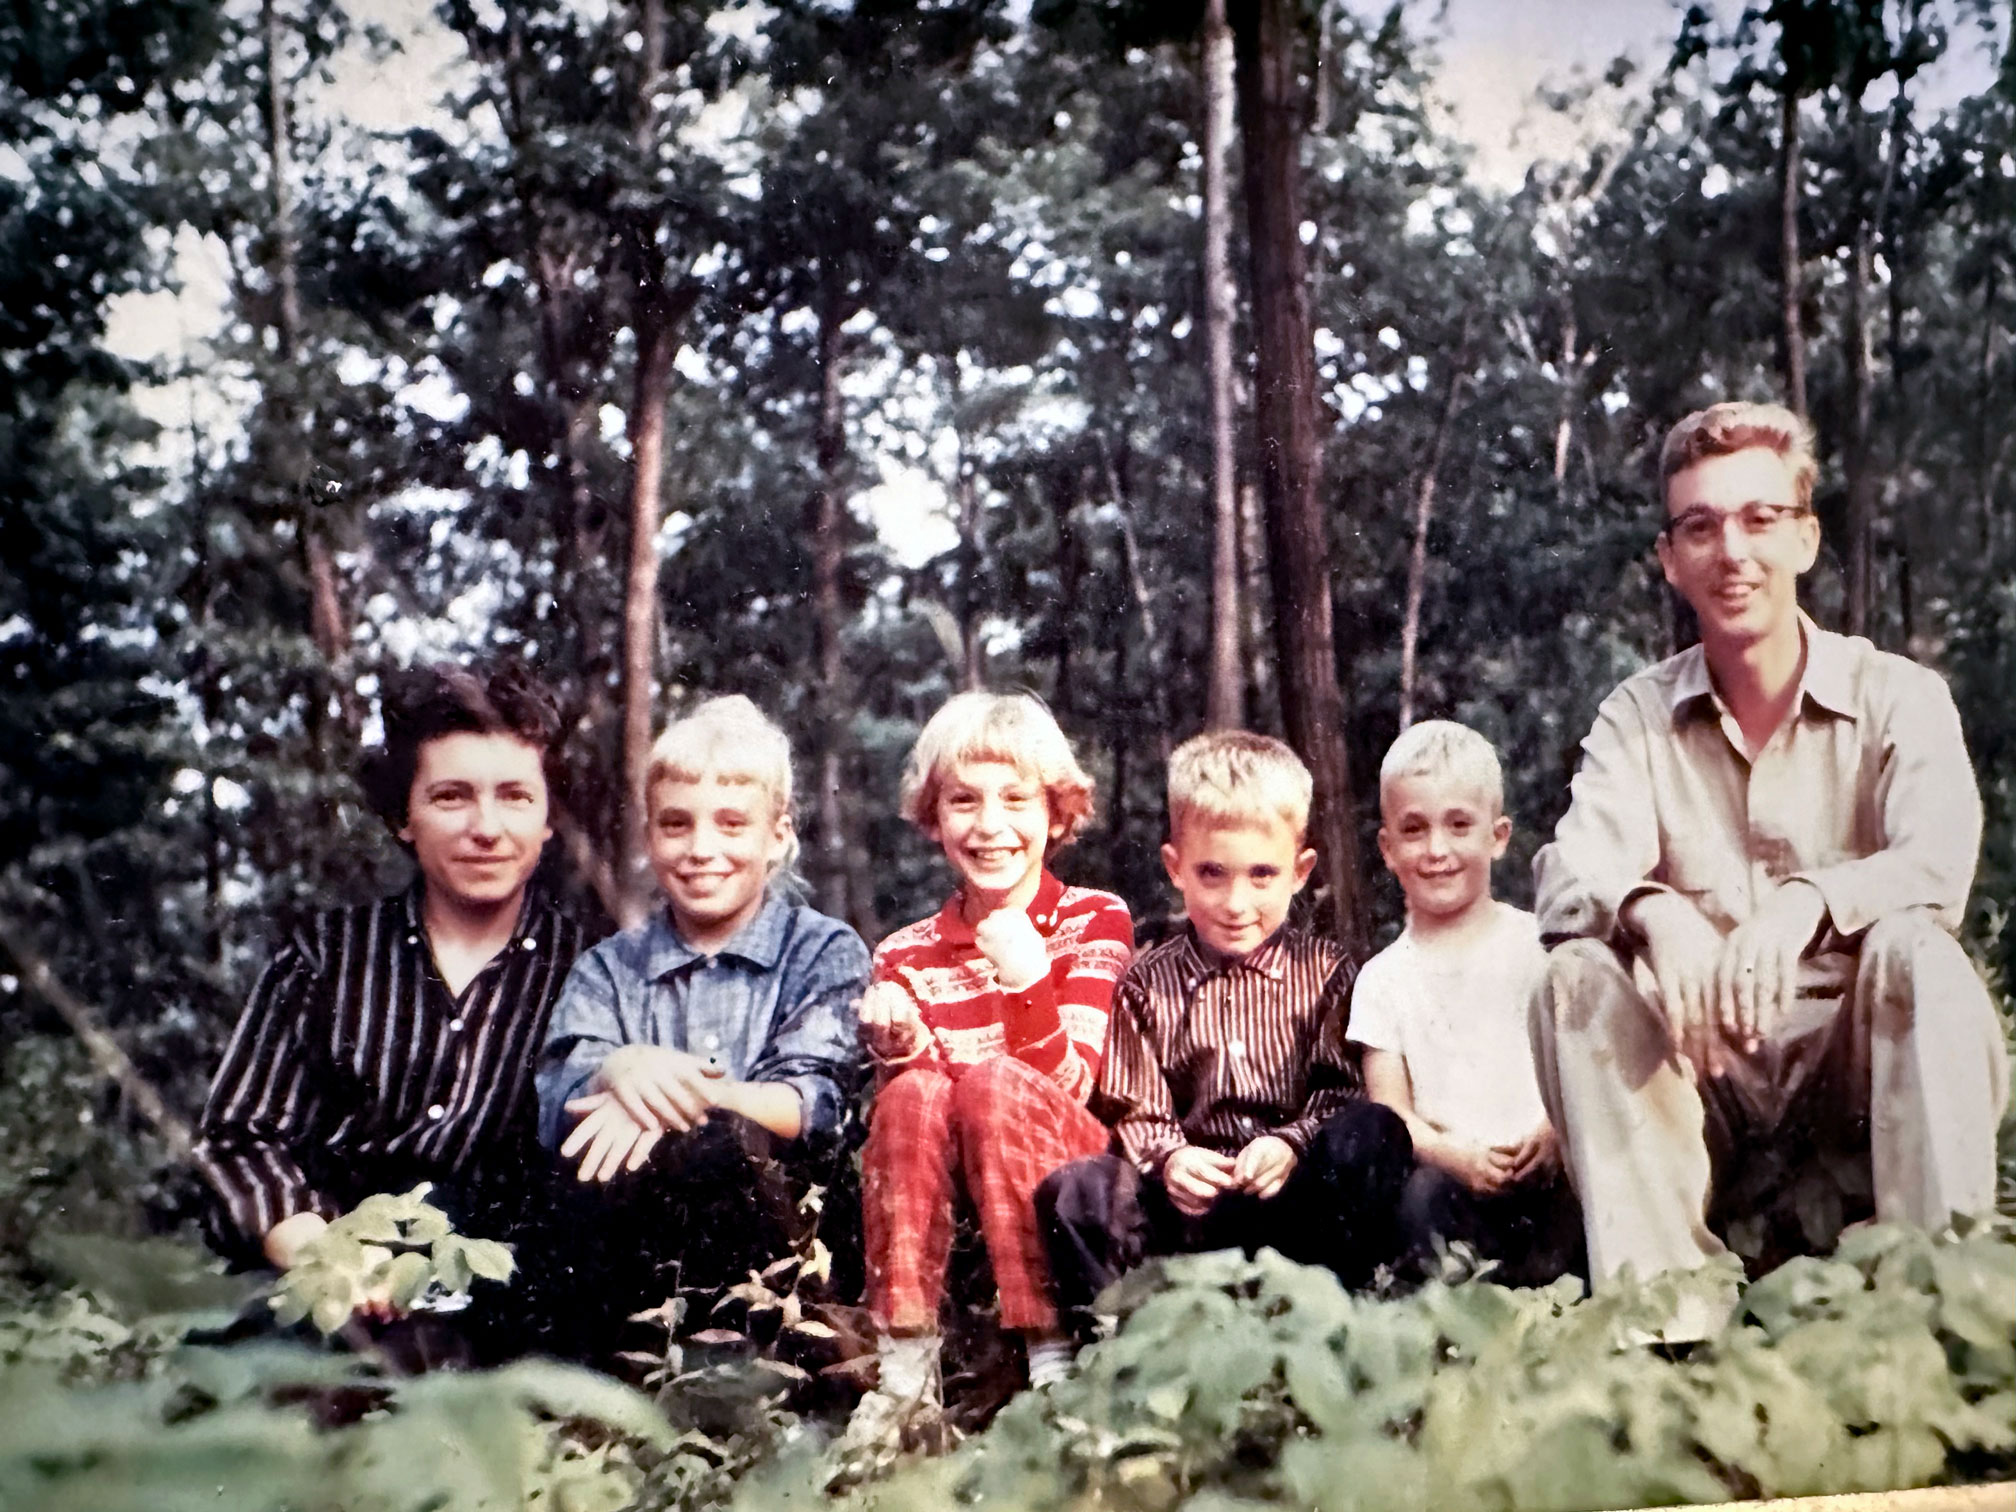 Hosler pictured with wife and children outside with trees in background, courtesy